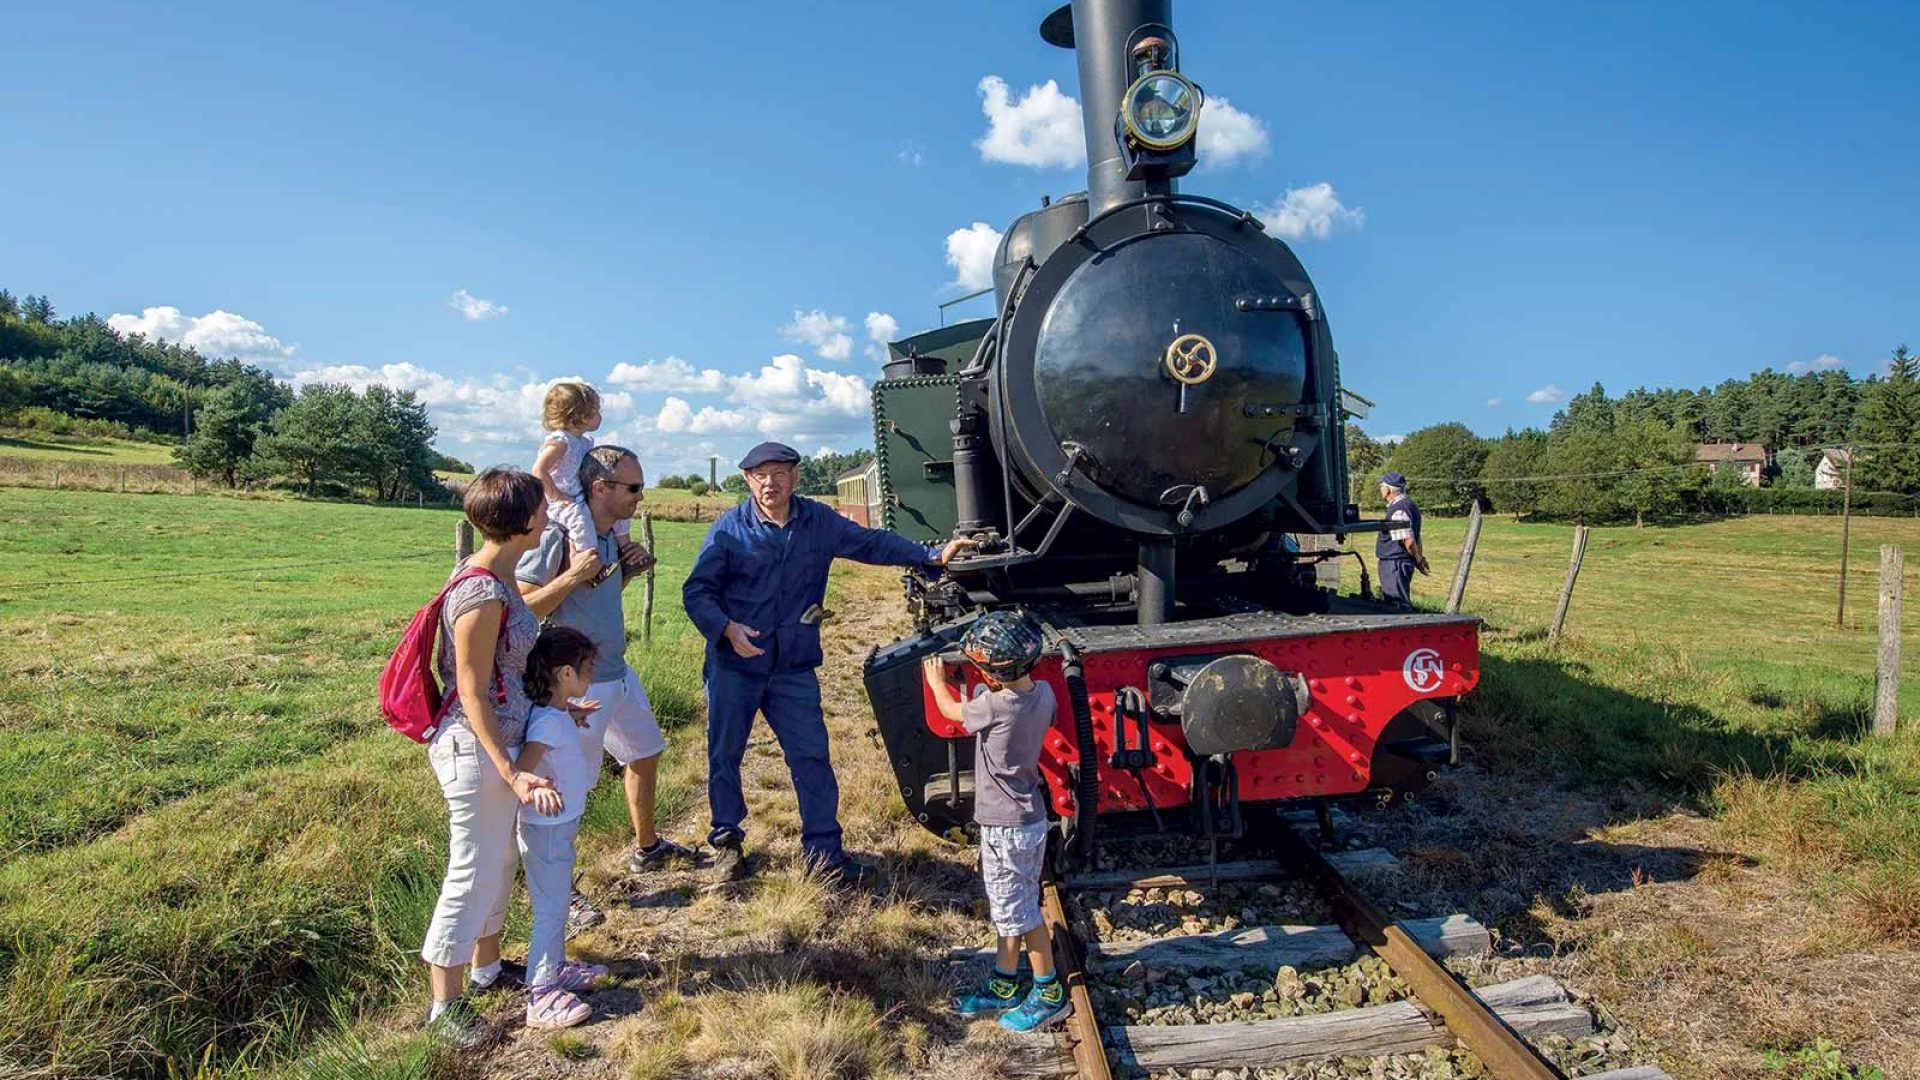 A family speaks with the Velay Express railway worker in Haute-Loire, Auvergne